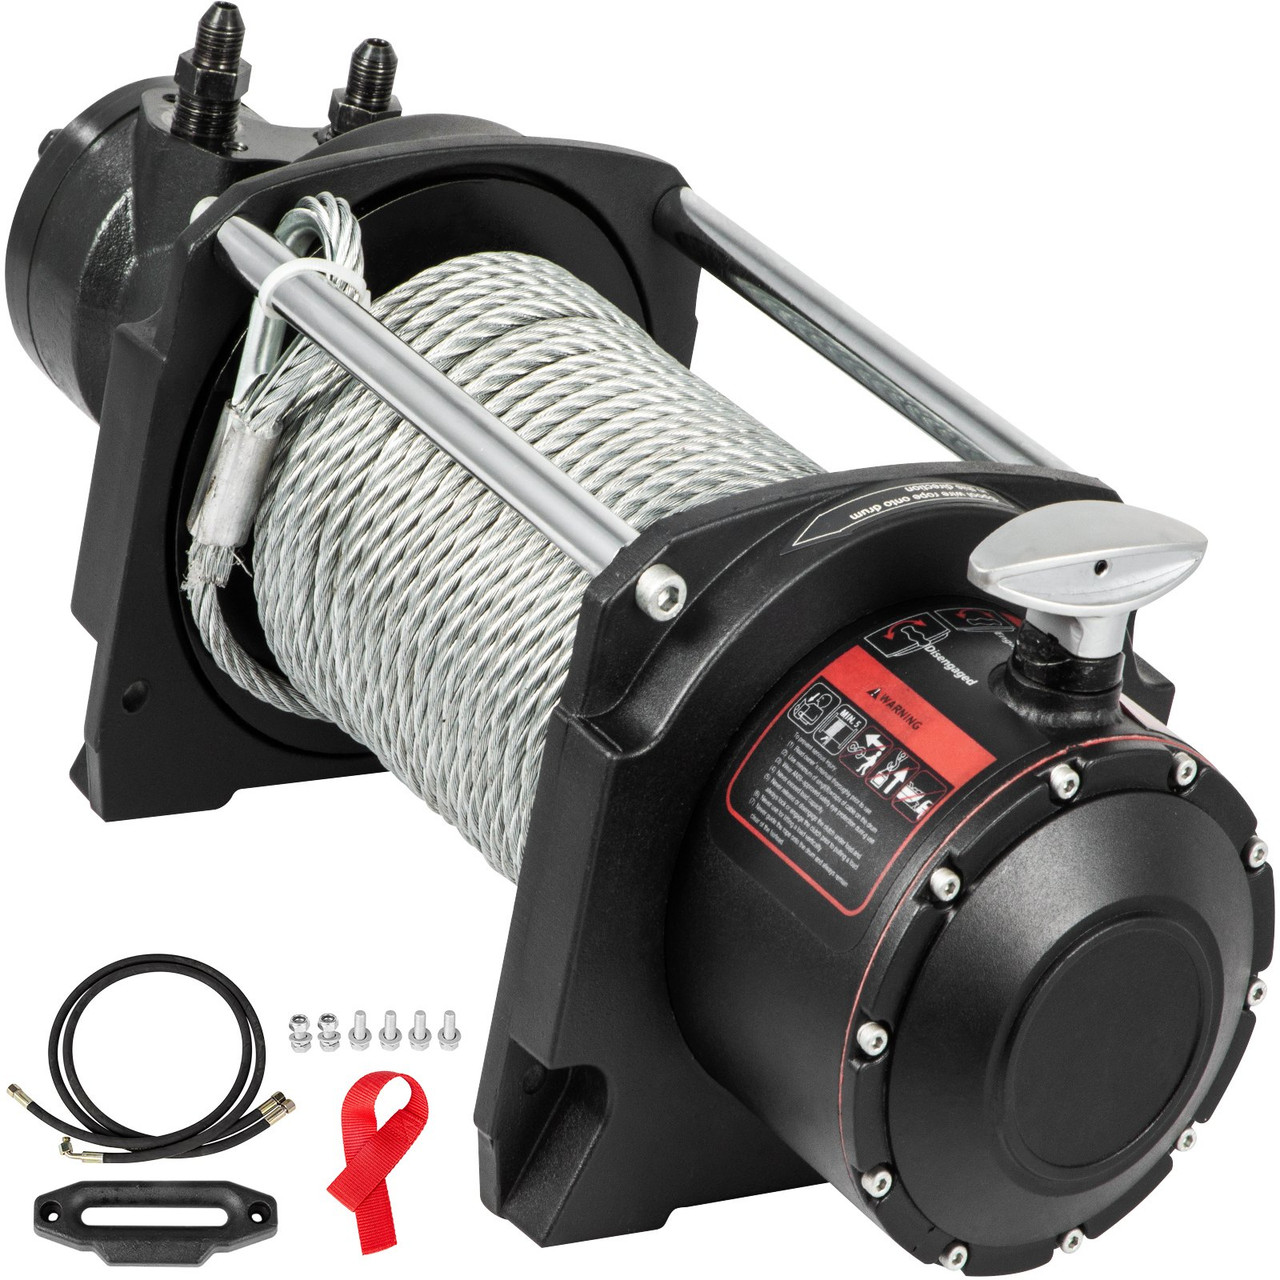 Hydraulic Winch, Anchor Winch 10000 lbs,Steel Cable Drive Winch for Towing